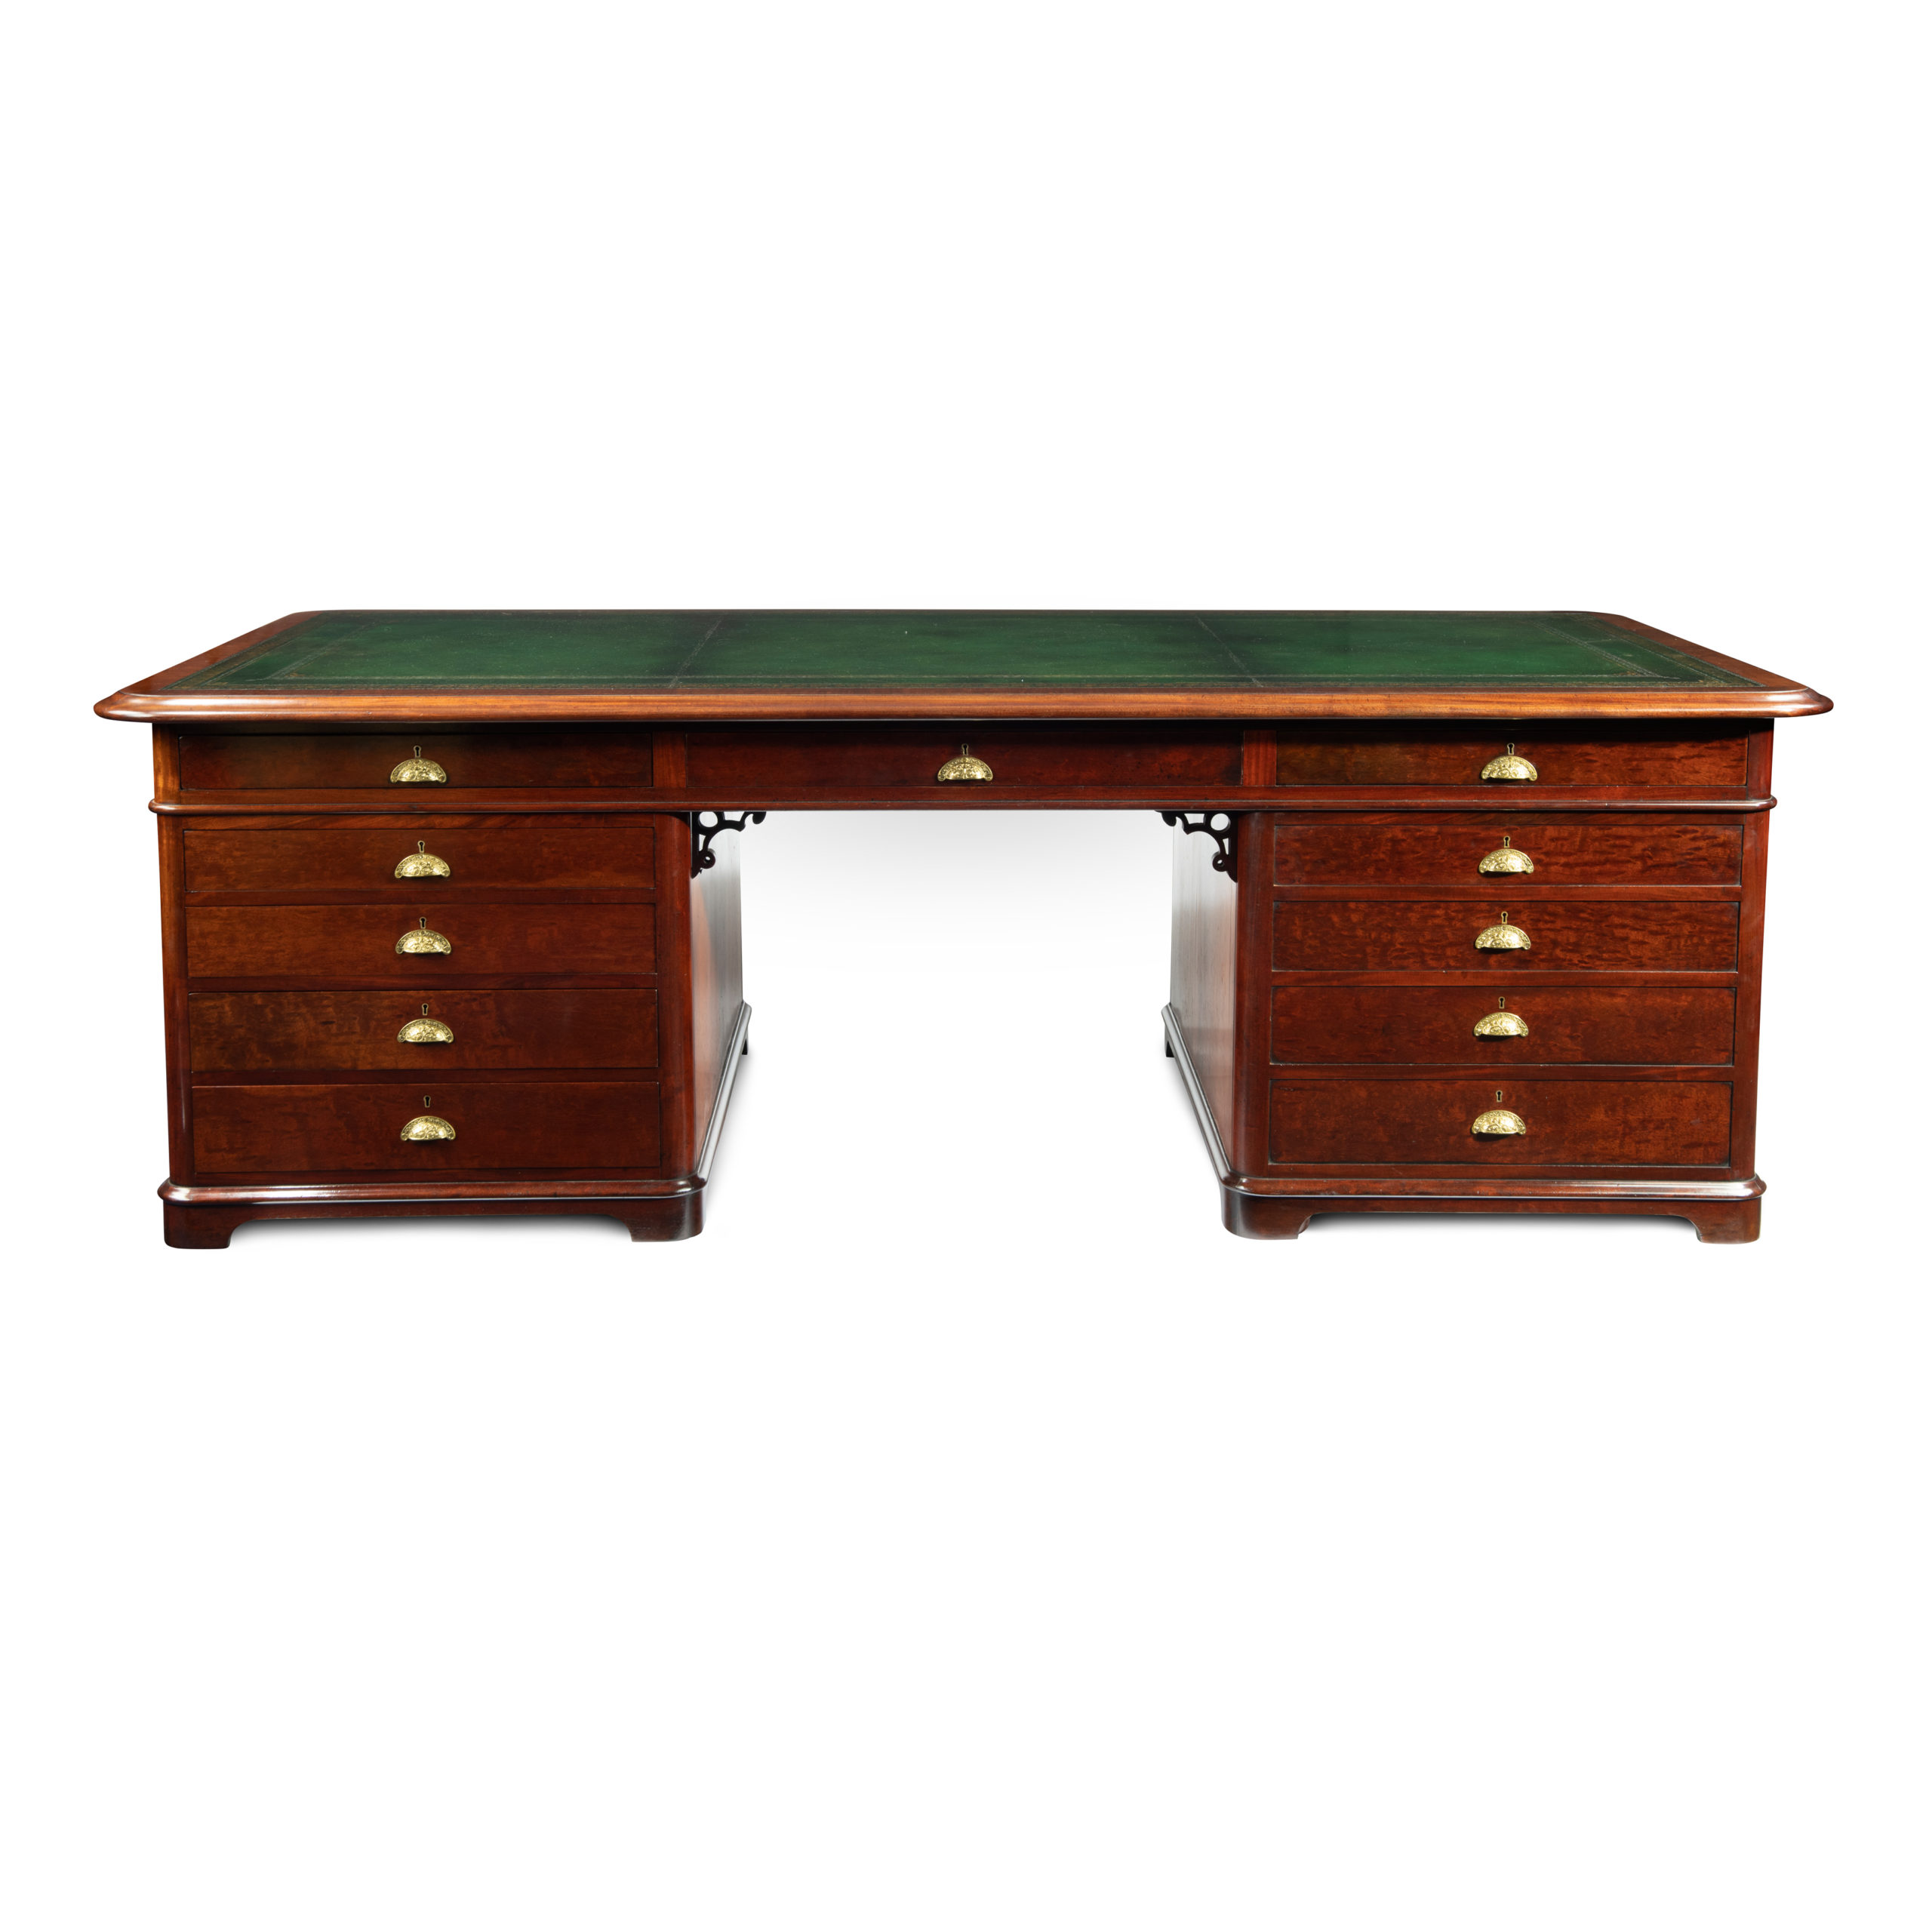 A large and imposing Victorian mahogany partners' desk